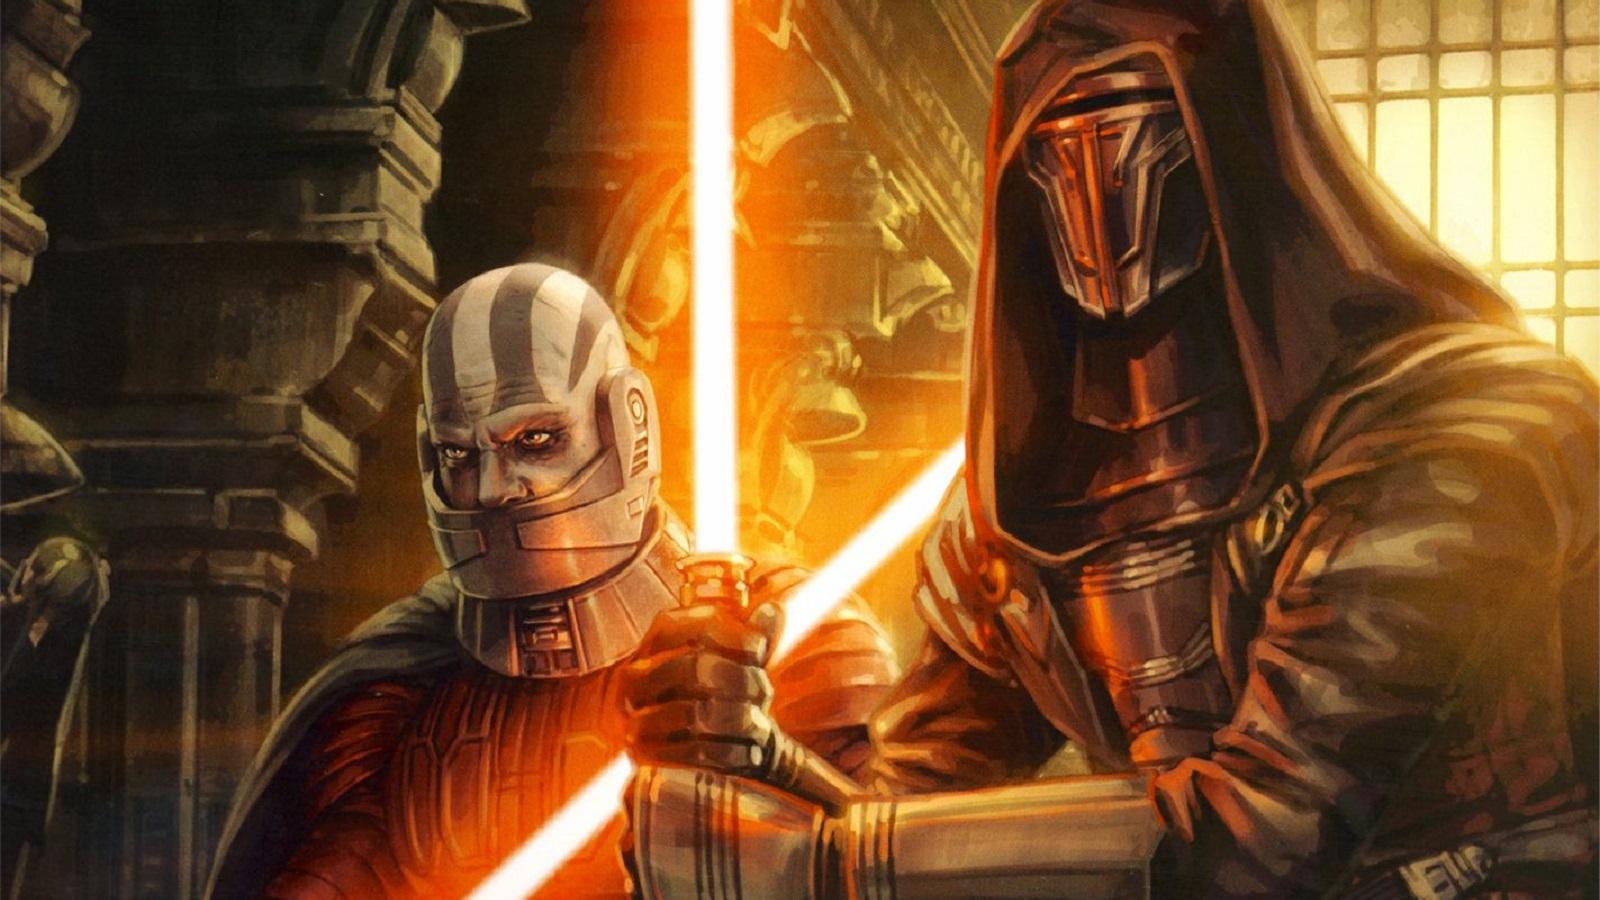 Star wars knights of the old republic русификатор steam фото 112